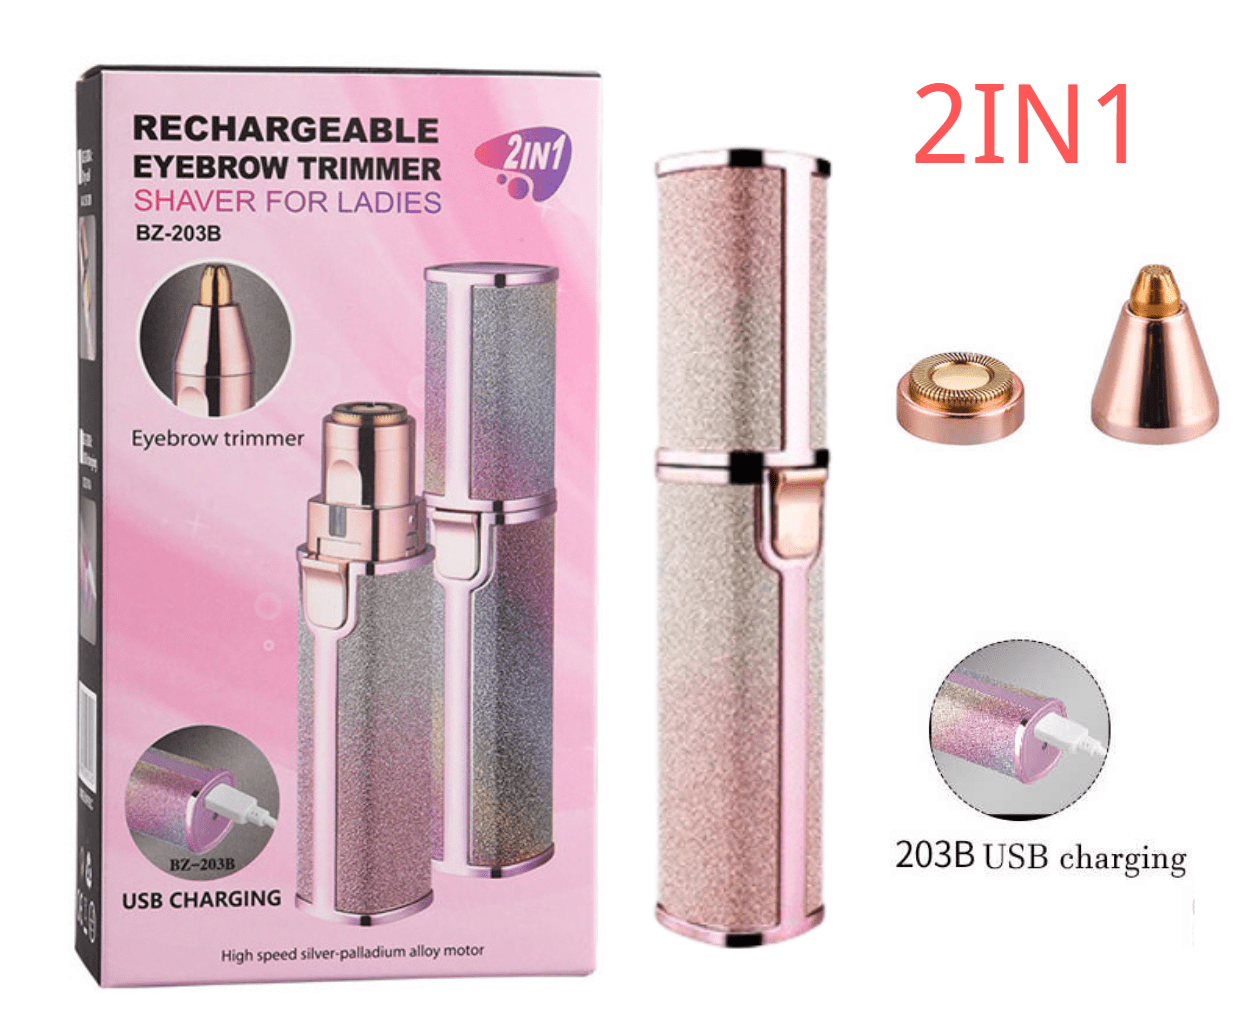 Gemei Hair shaver GM-3052 Pink GM-3052 - Pink Size 18.5 x 19.5 x 5.5 cm.